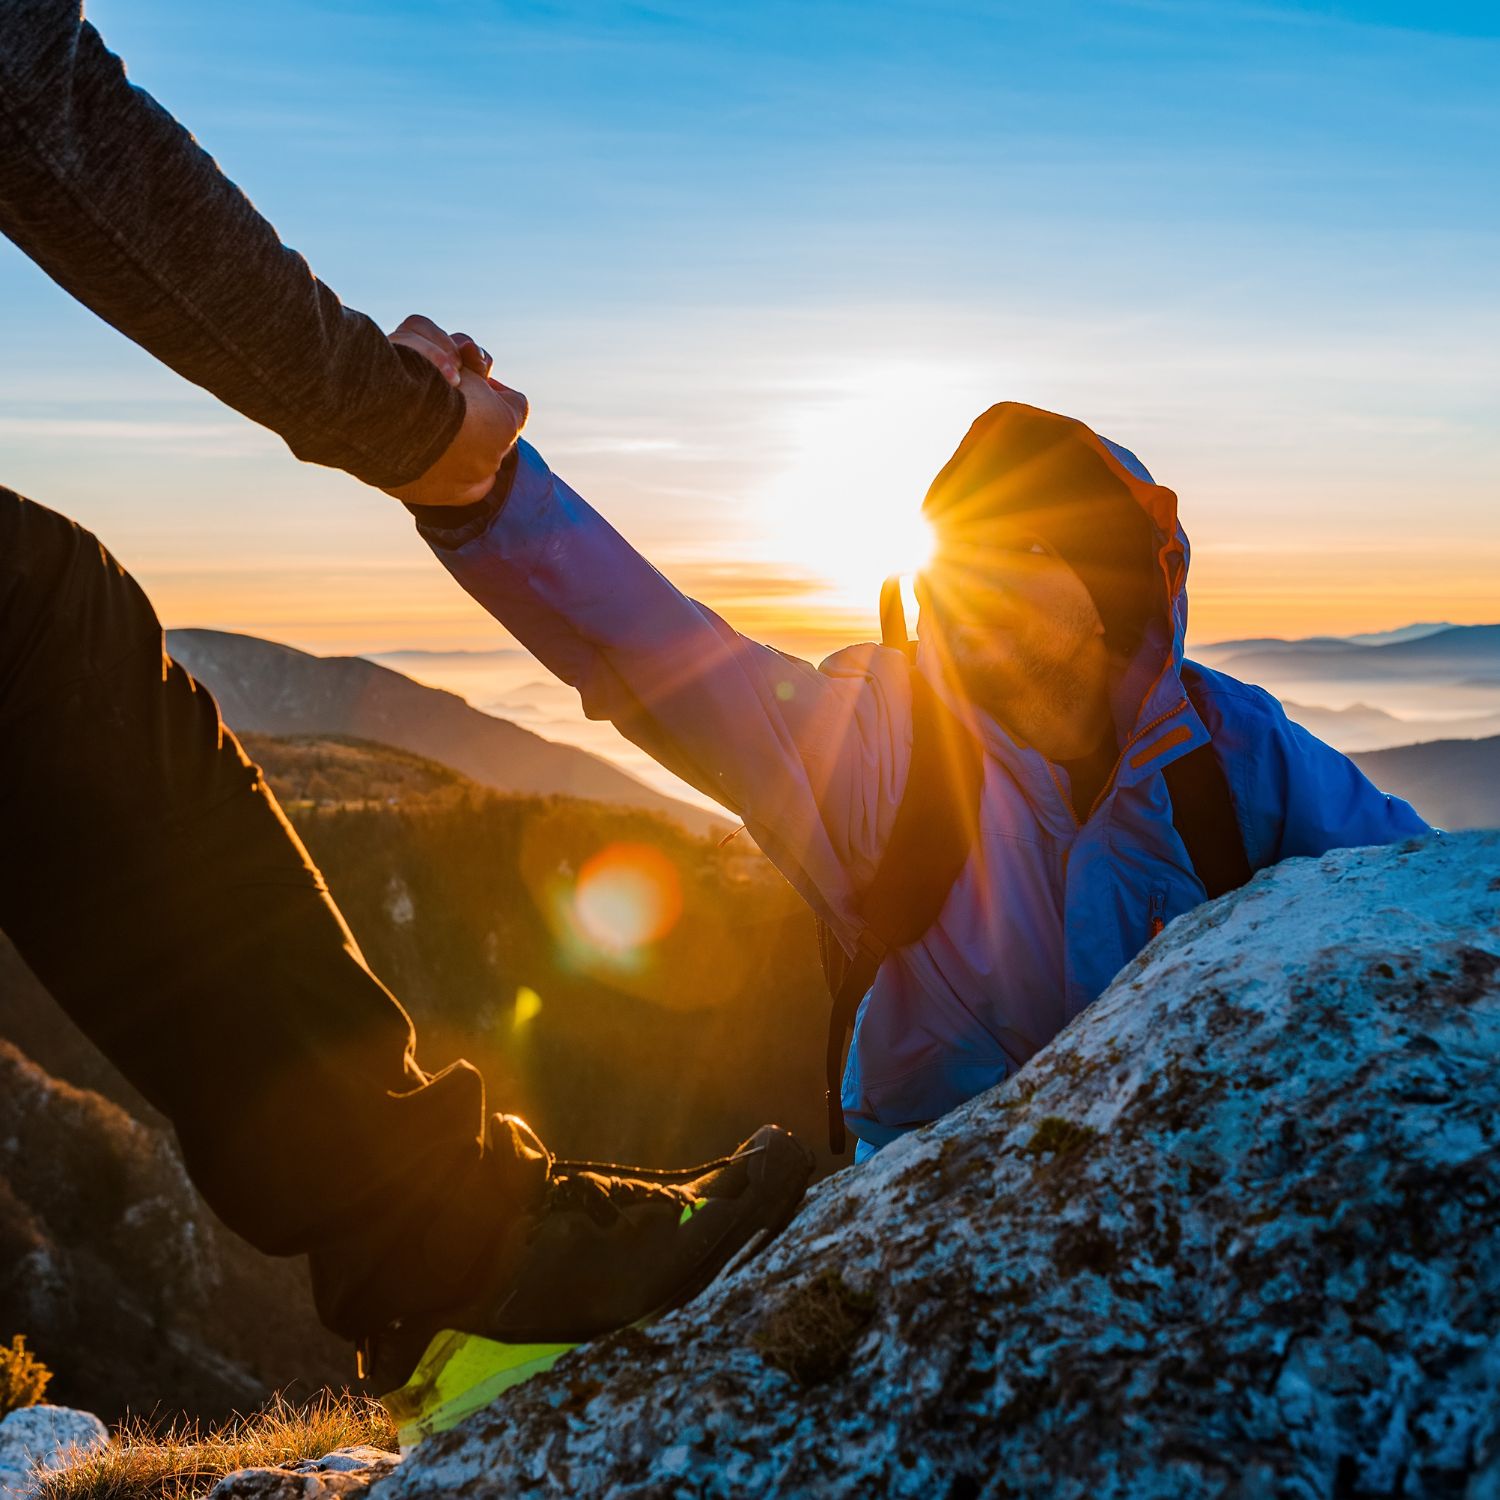 How To Stay Warm and Comfortable on a Mountain Hike